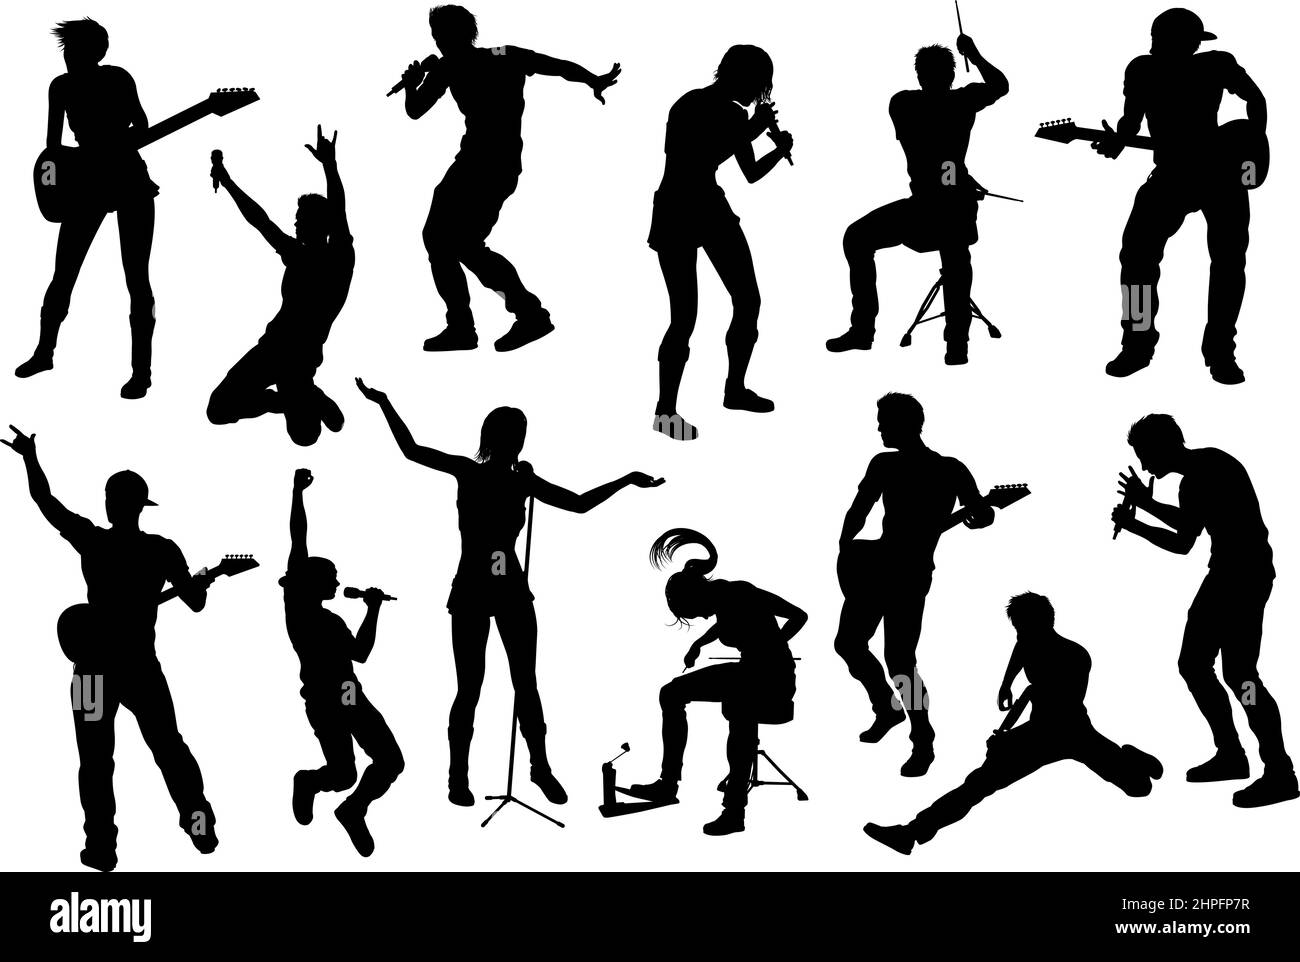 Musicians Group People Silhouettes Stock Vector